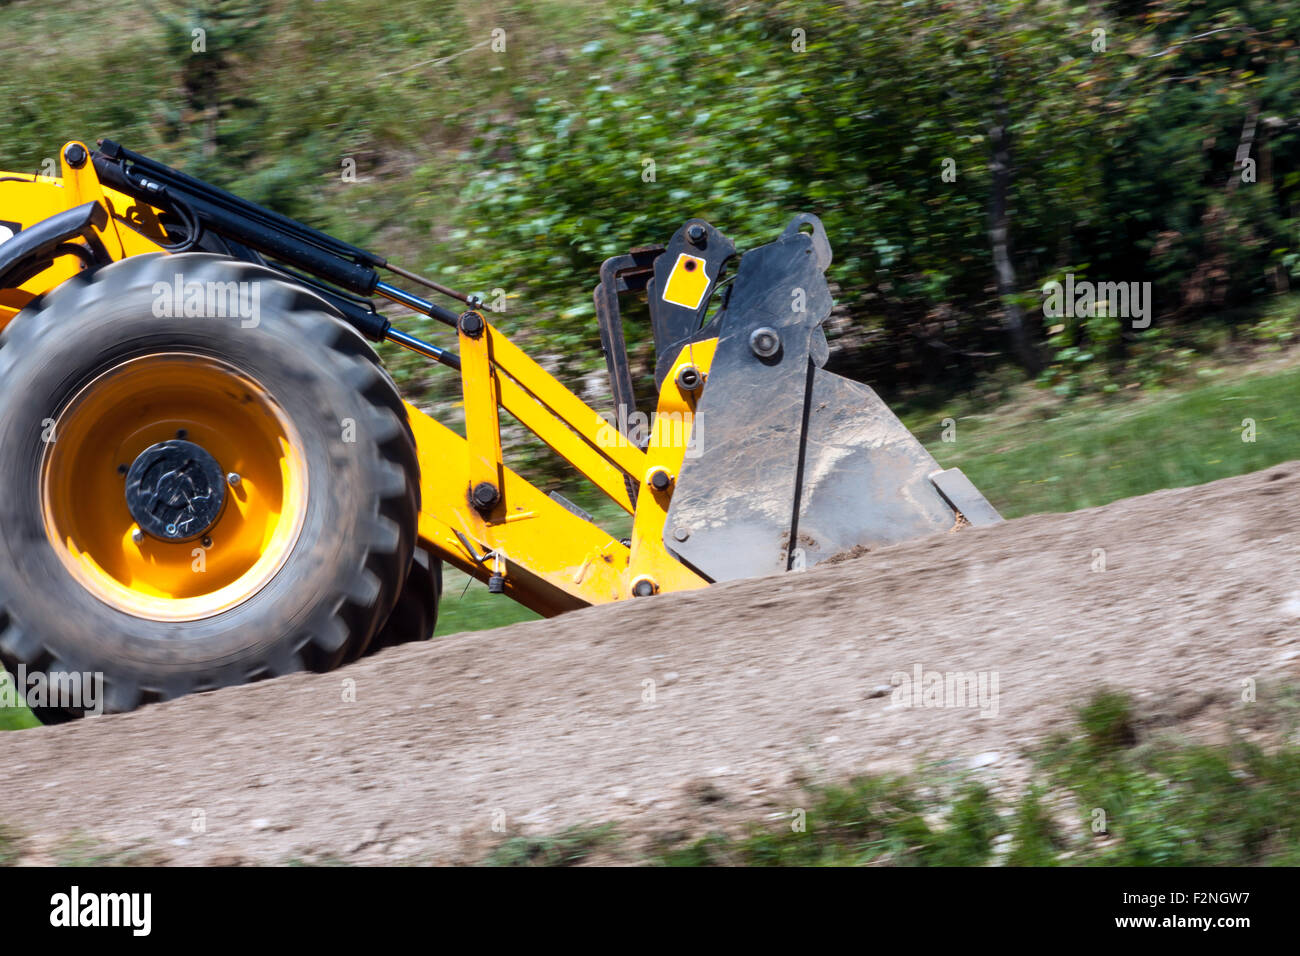 detail yellow excavator traveling on the road, panning image Stock Photo